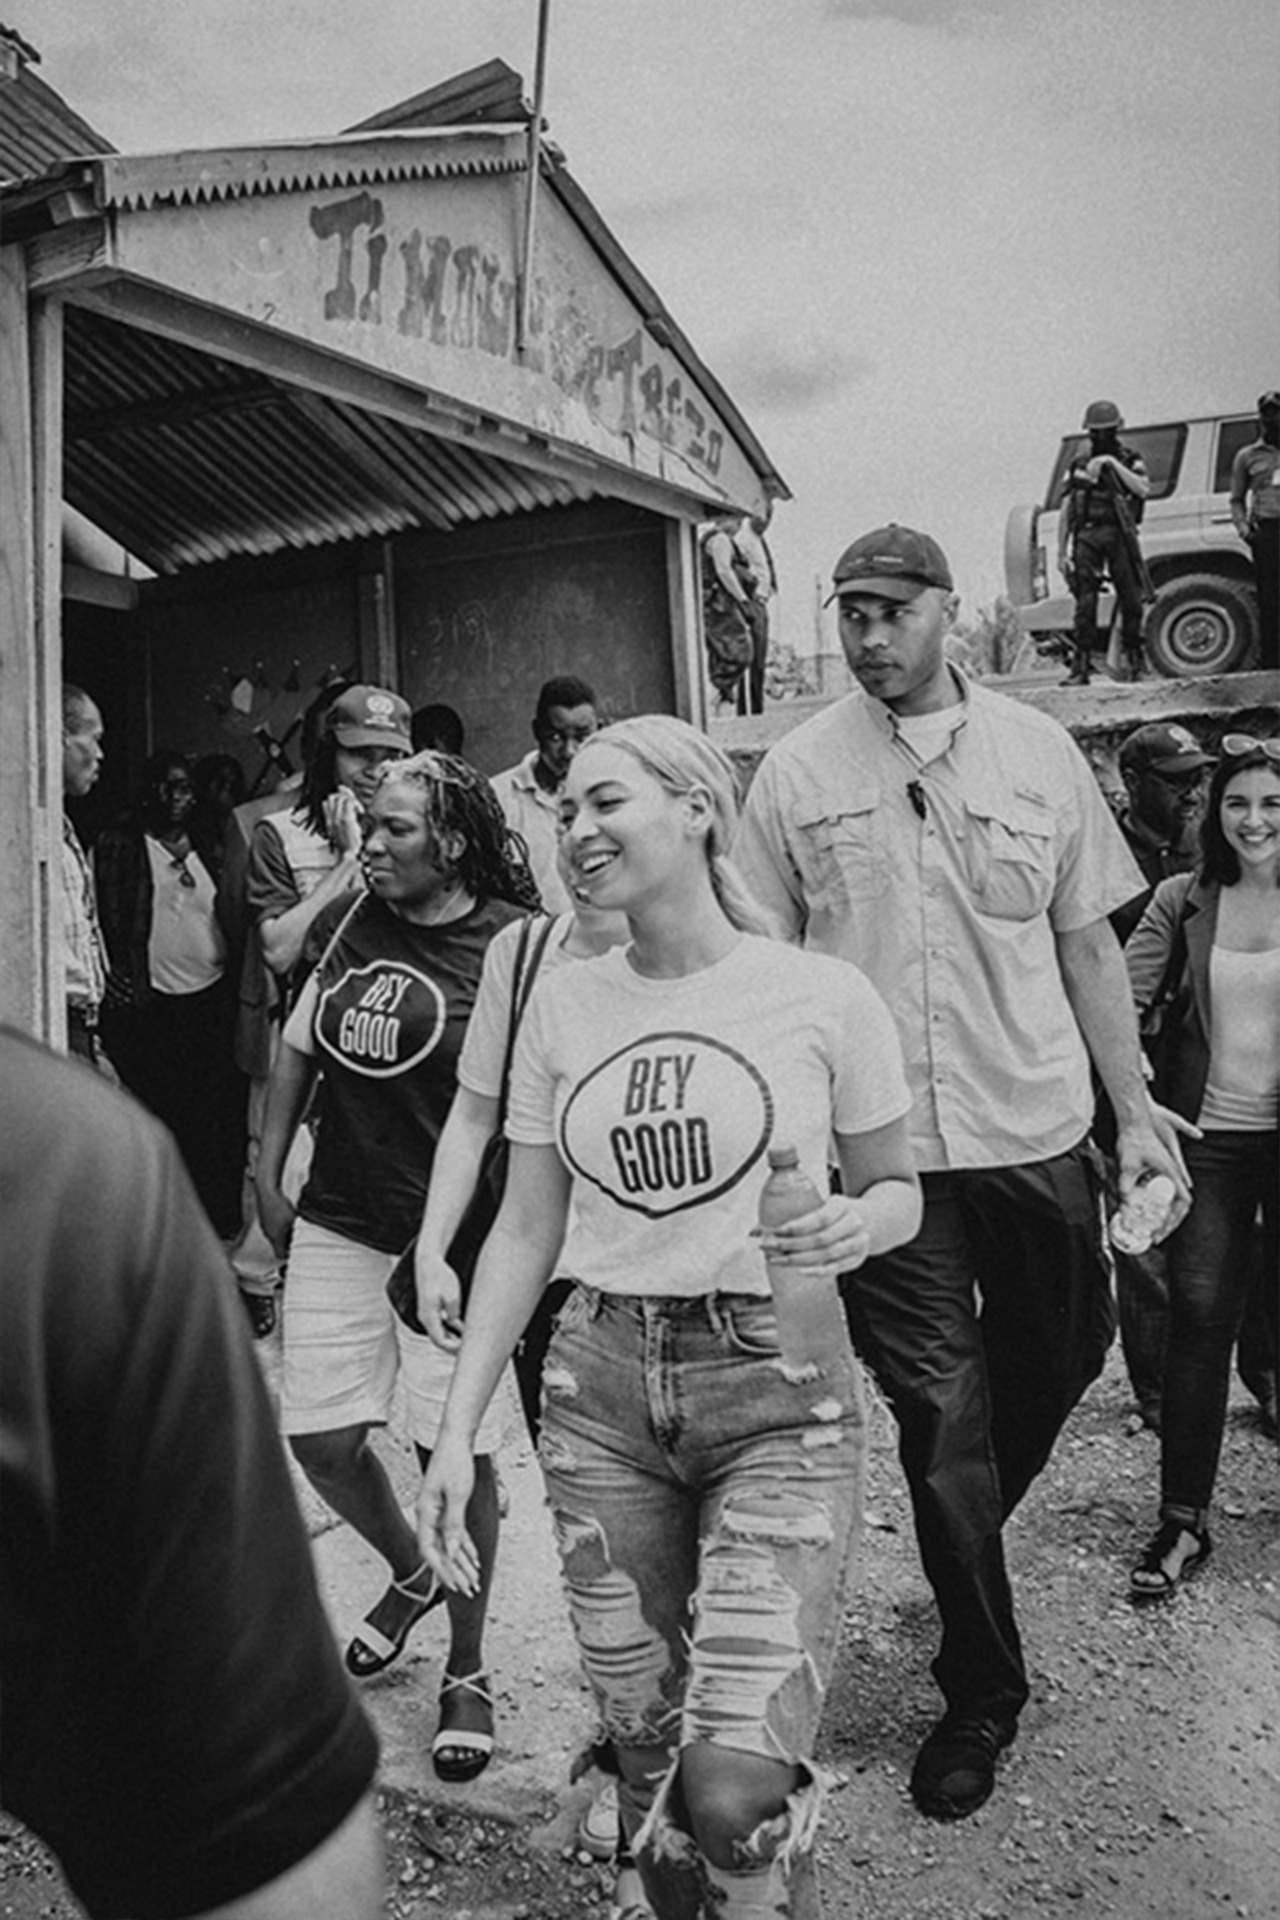 

Beyoncé visited Haiti in a humanitarian mission with the United Nations 

